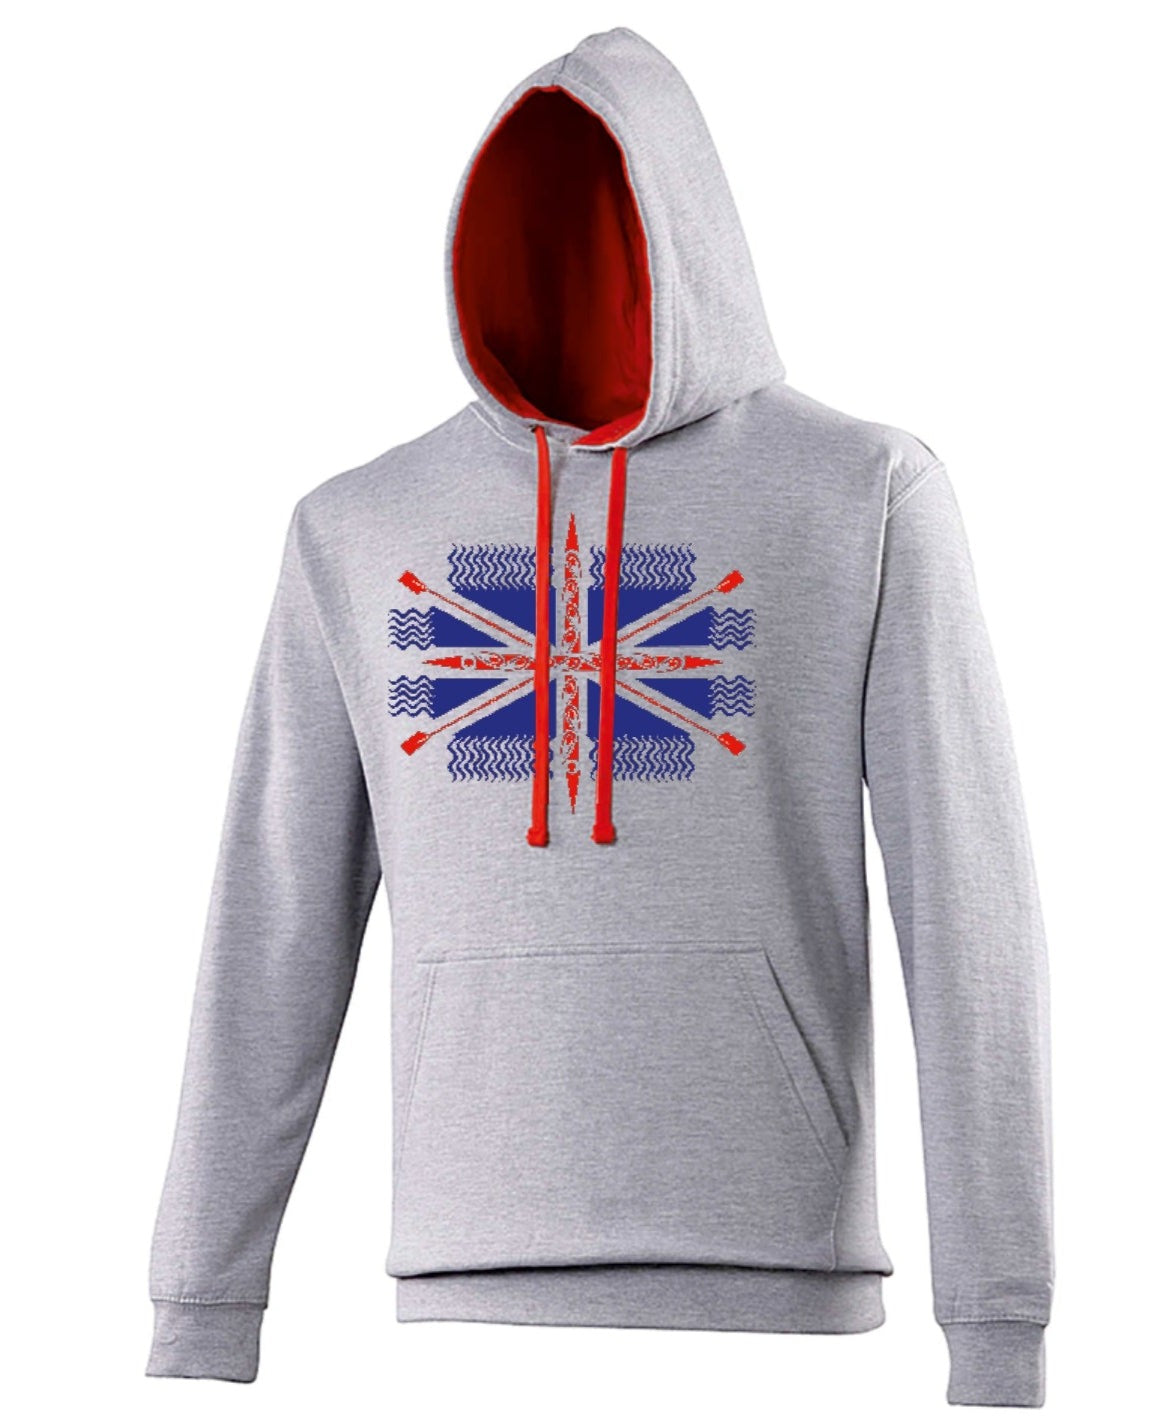 GB Supporters Hoodie